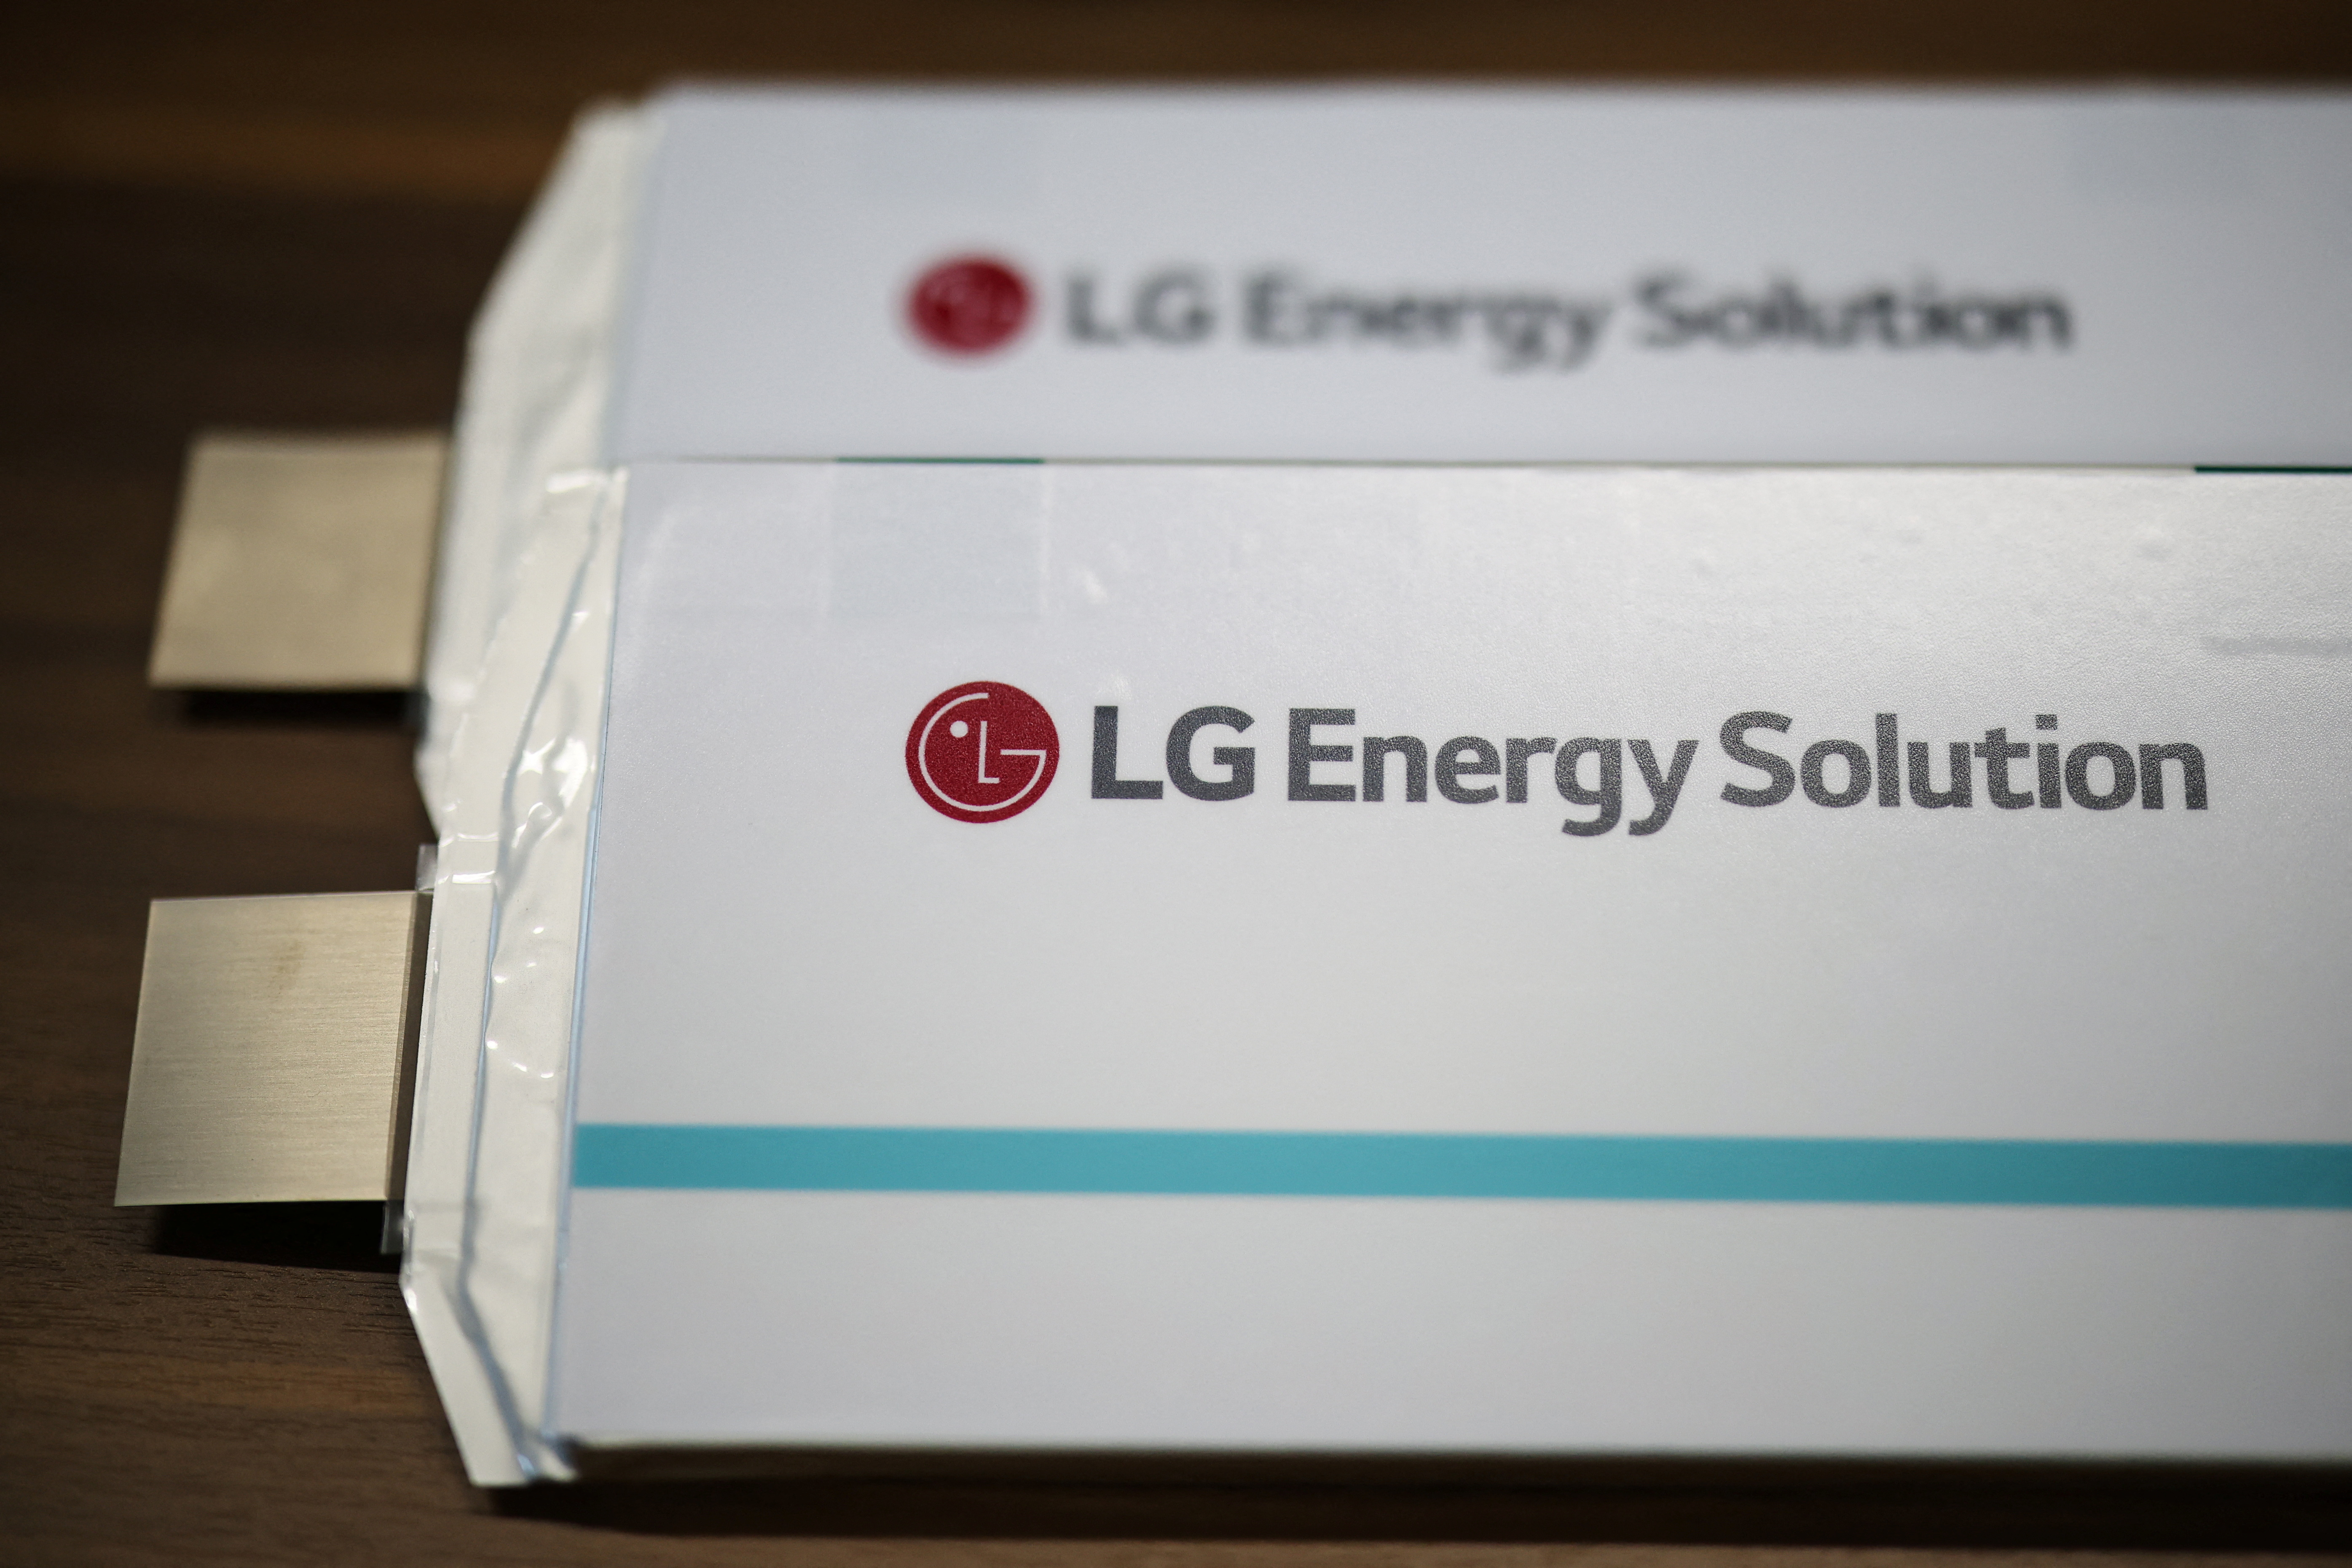 Battery maker LG Energy Solution steps up measures to protect intellectual property